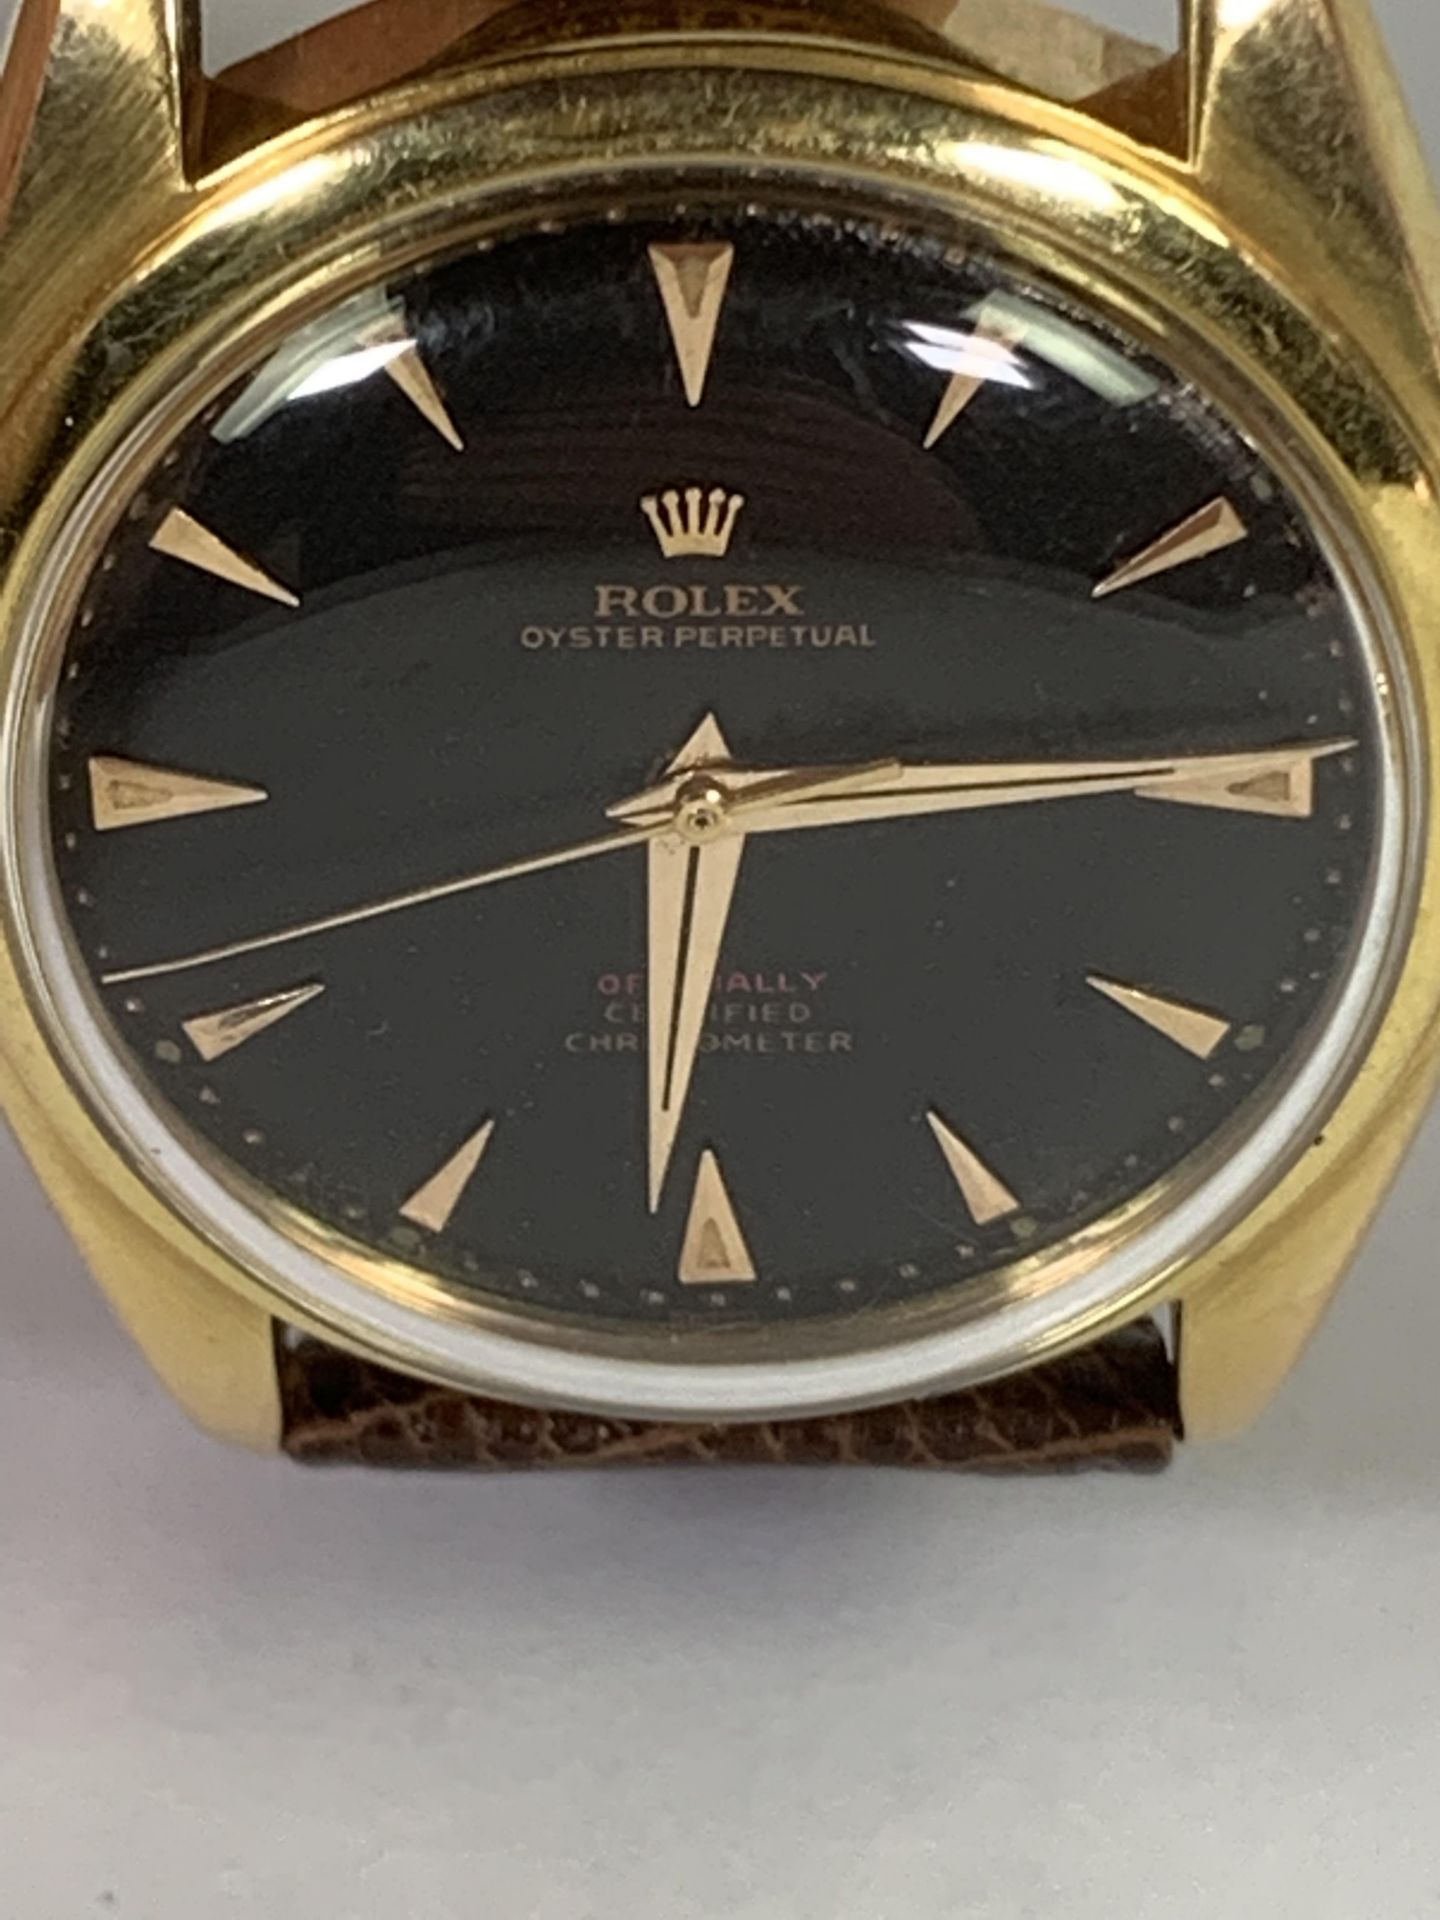 Extremely rare 1950's men's Rolex Oyster Perpetual ref 6029, crown 1951 - Image 10 of 16